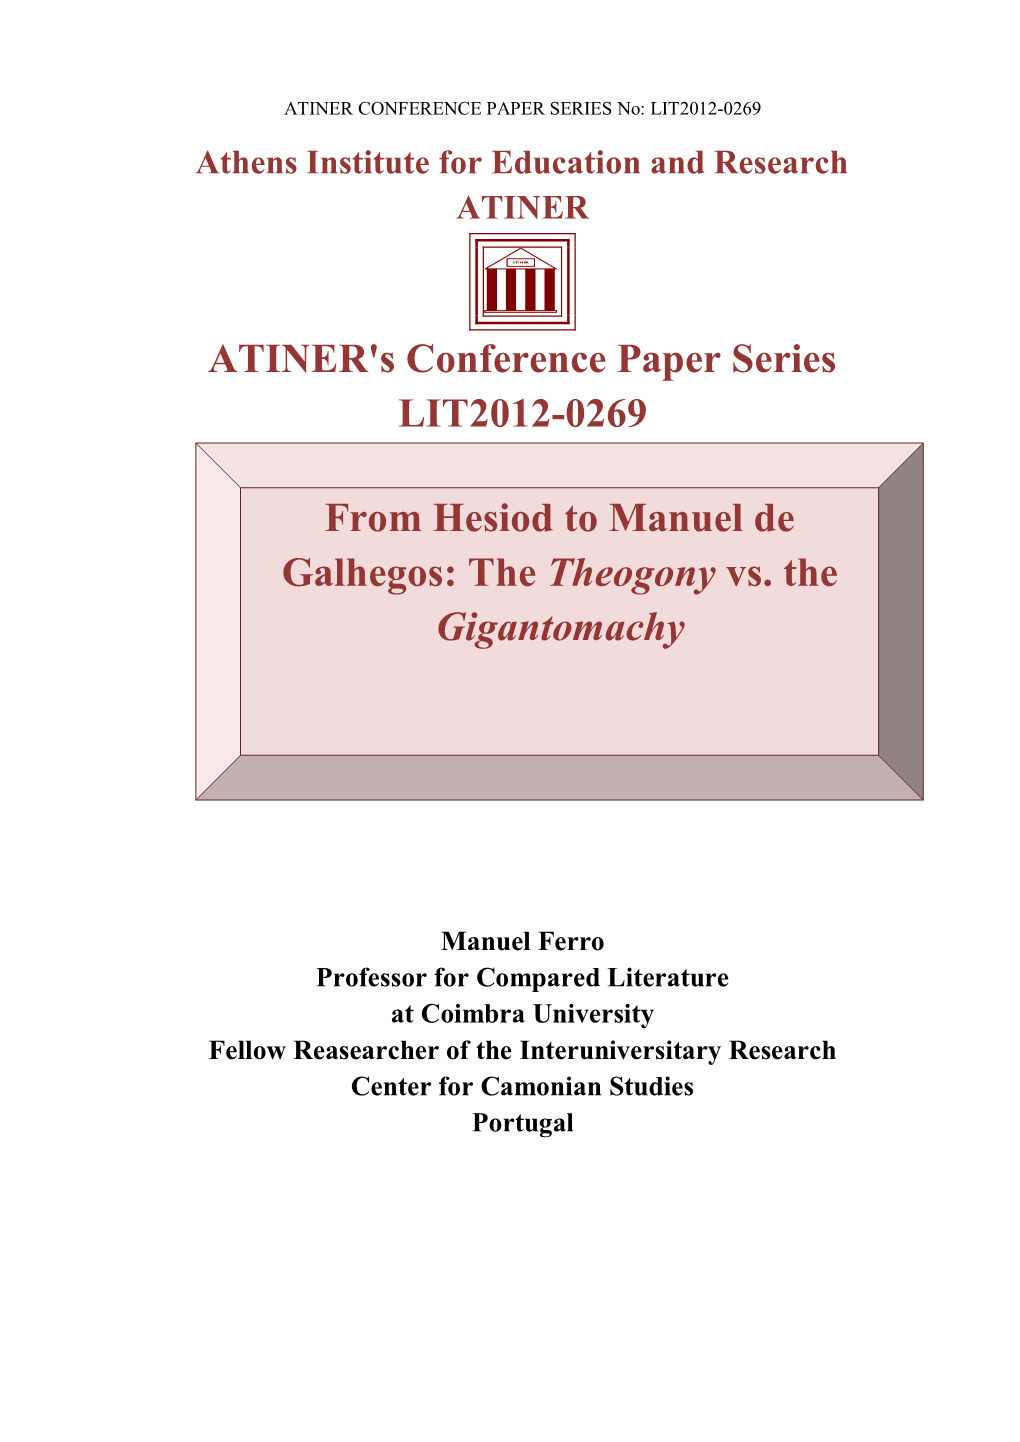 ATINER's Conference Paper Series LIT2012-0269 from Hesiod to Manuel De Galhegos: the Theogony Vs. the Gigantomachy